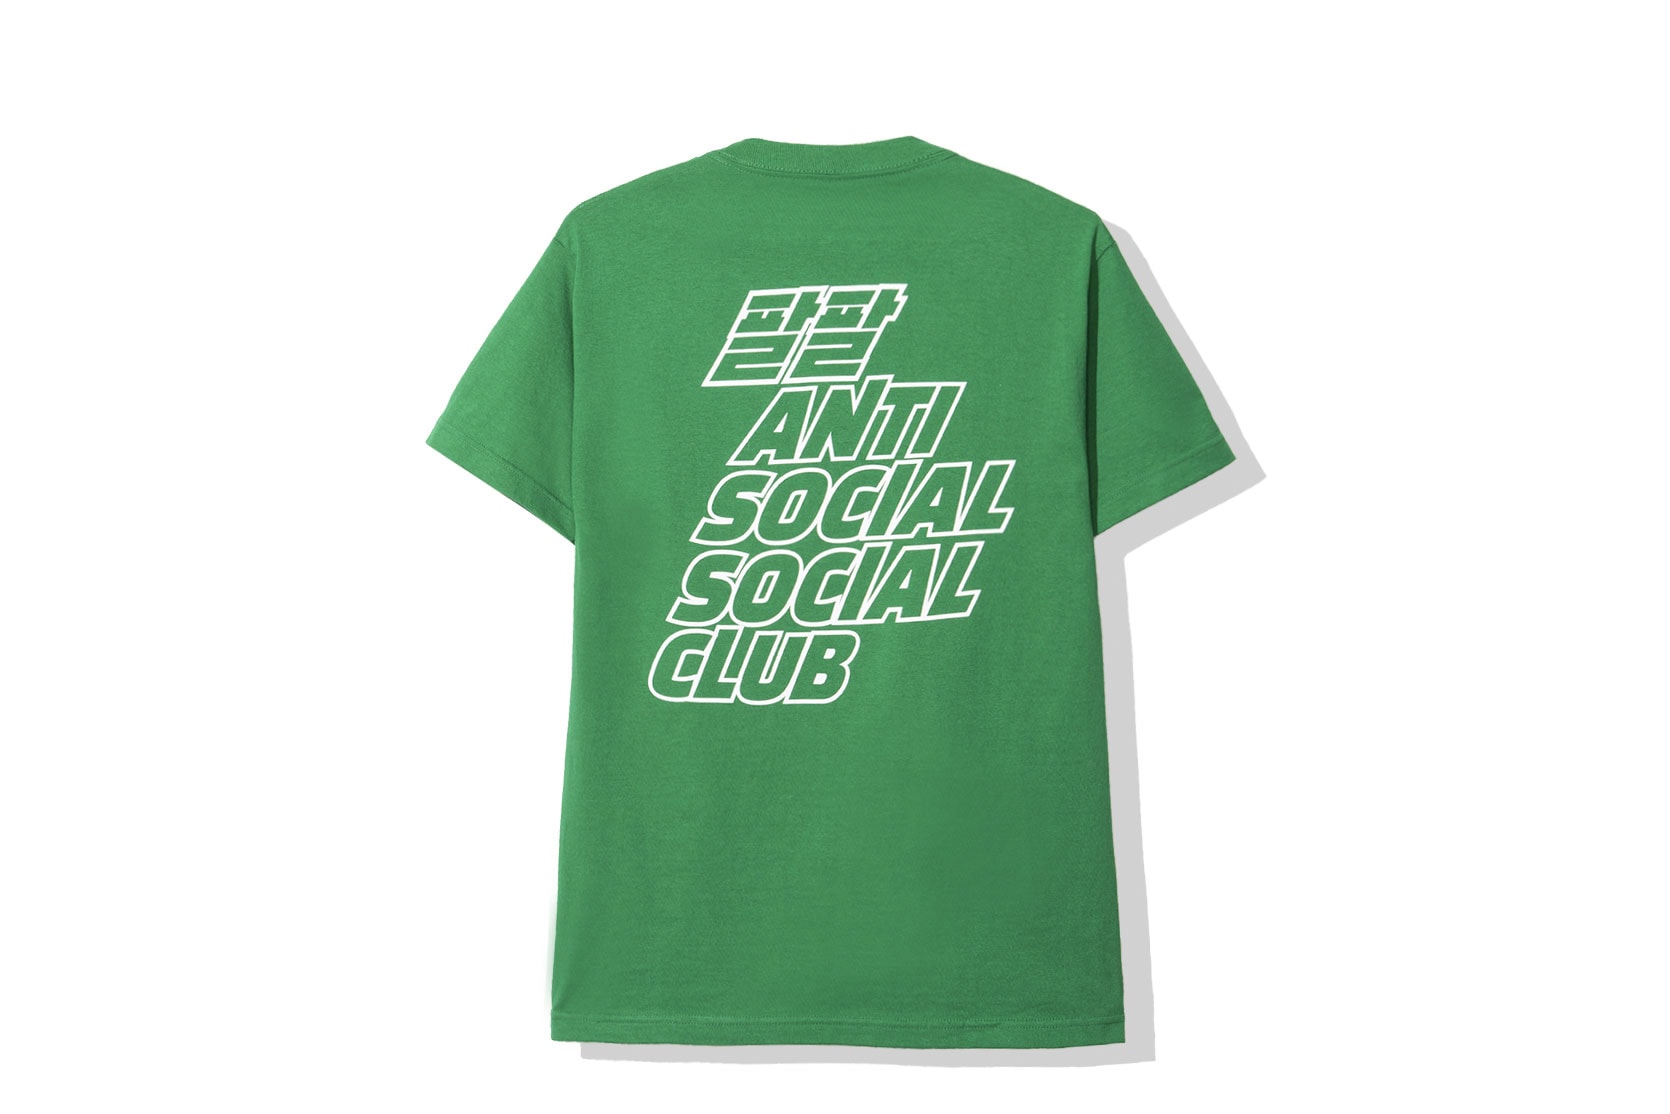 Anti Social Social Club FW19 "STILL STRESSED" Collection full items undefeated collaborations honda playboy accessories tenga 